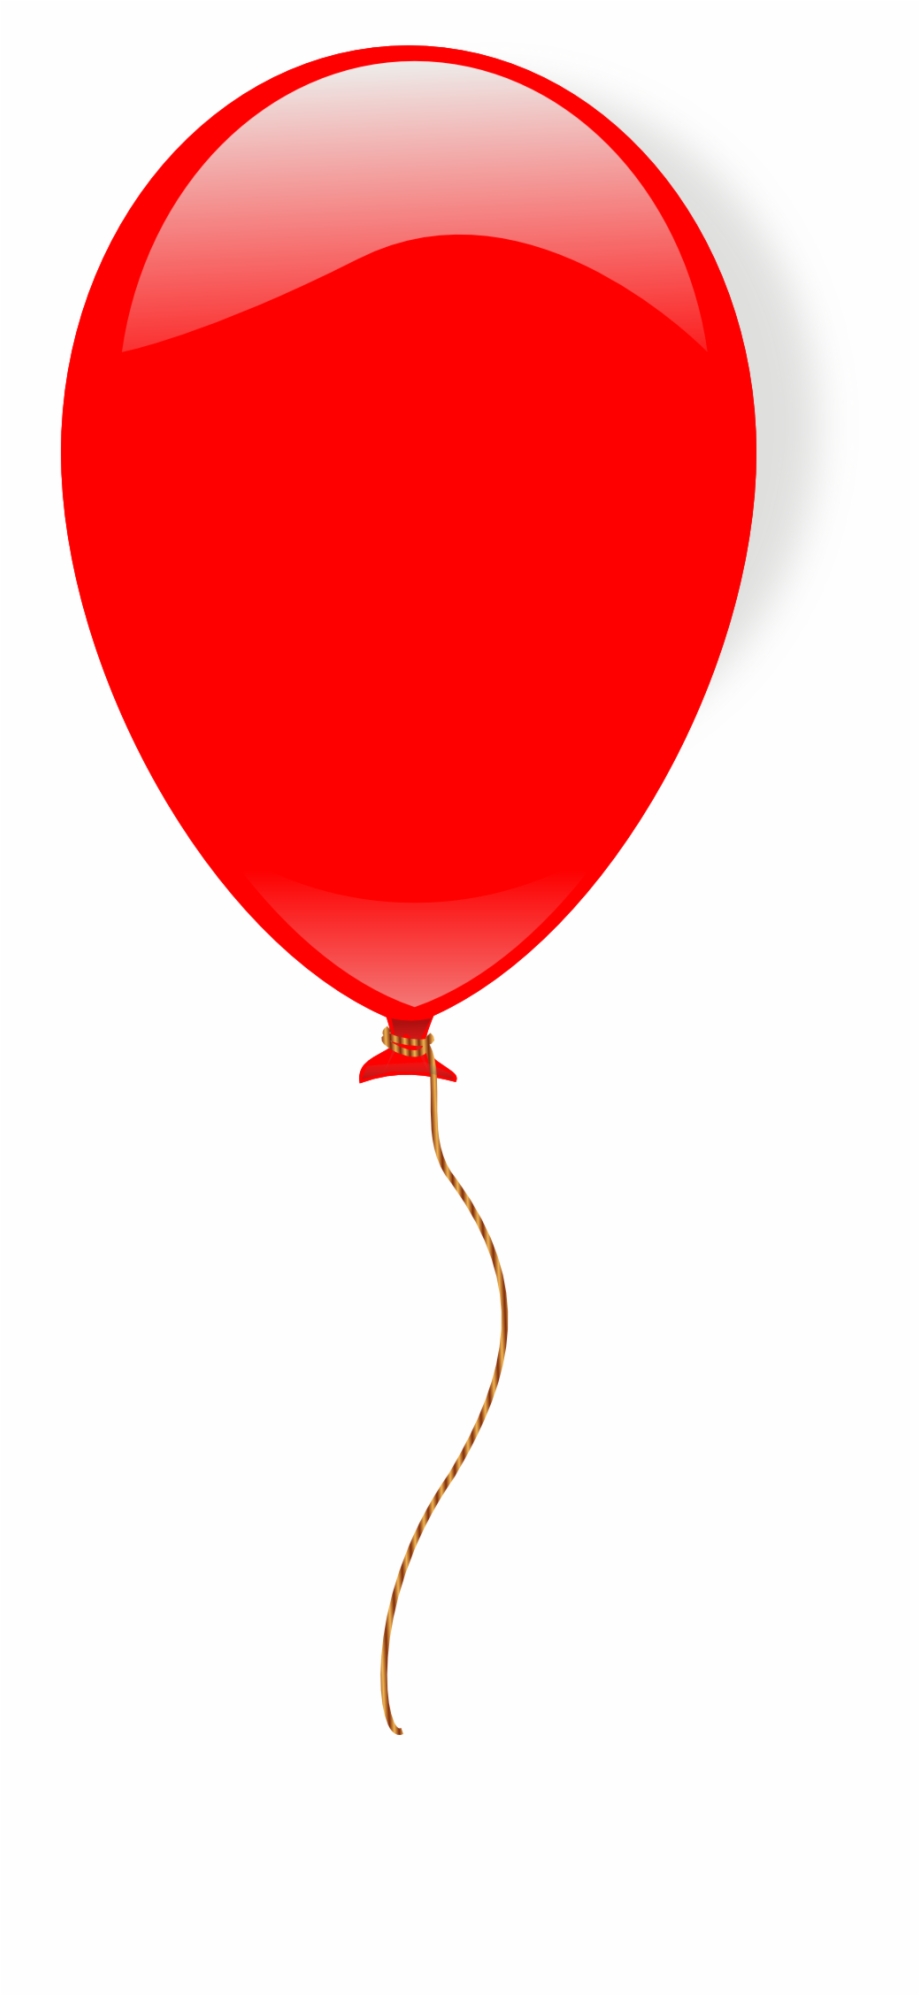 Red Party Balloon Drawing Free Image Red Balloon